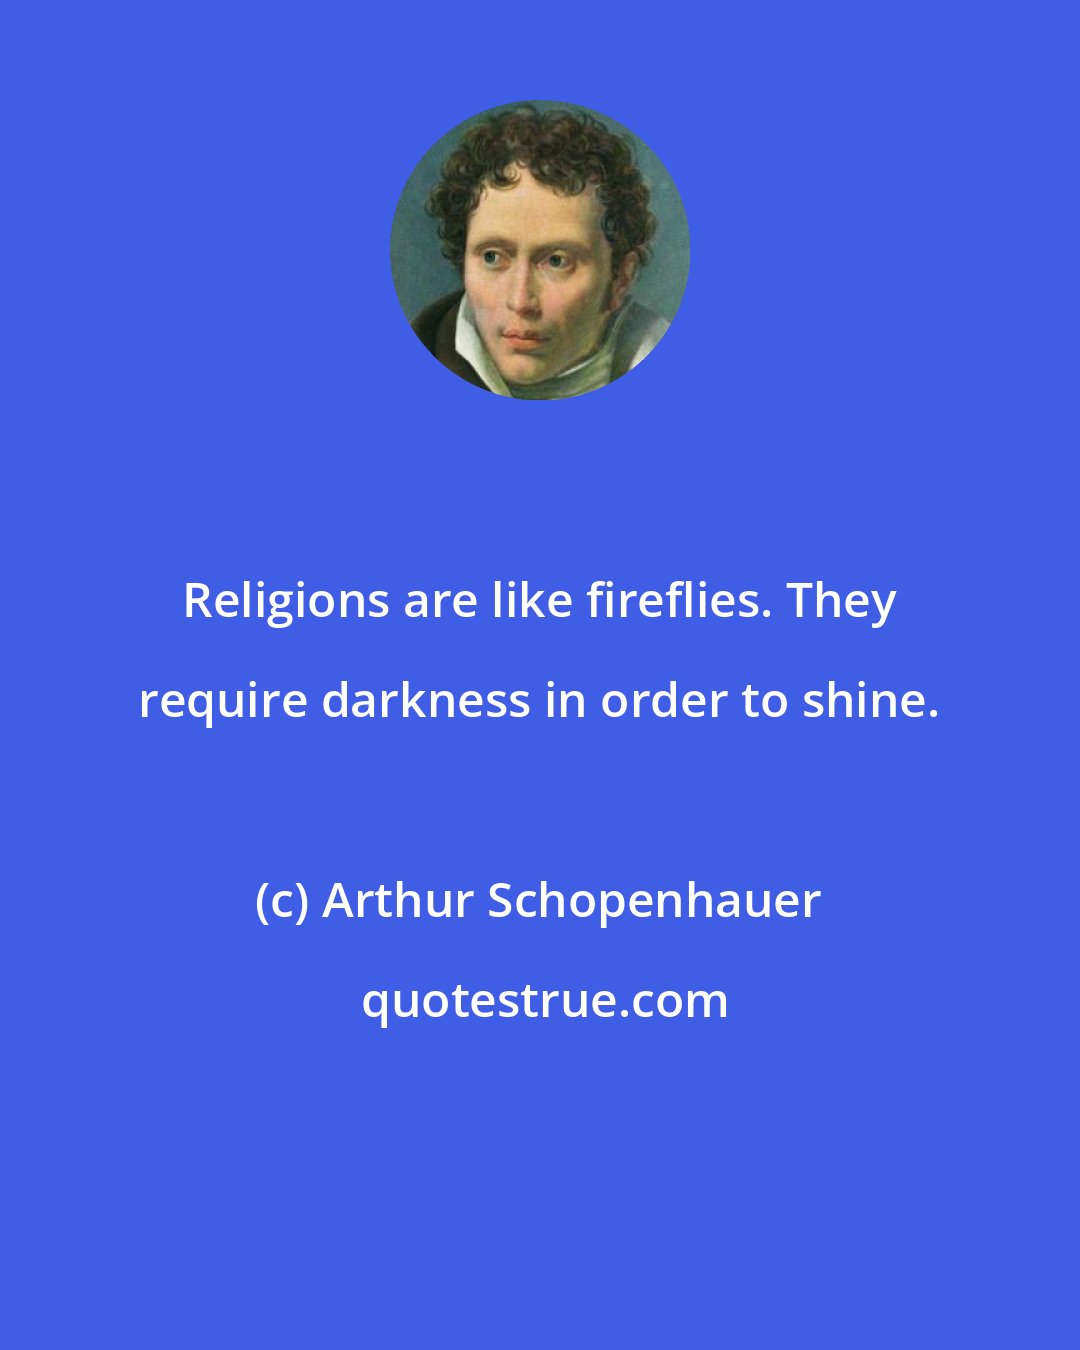 Arthur Schopenhauer: Religions are like fireflies. They require darkness in order to shine.